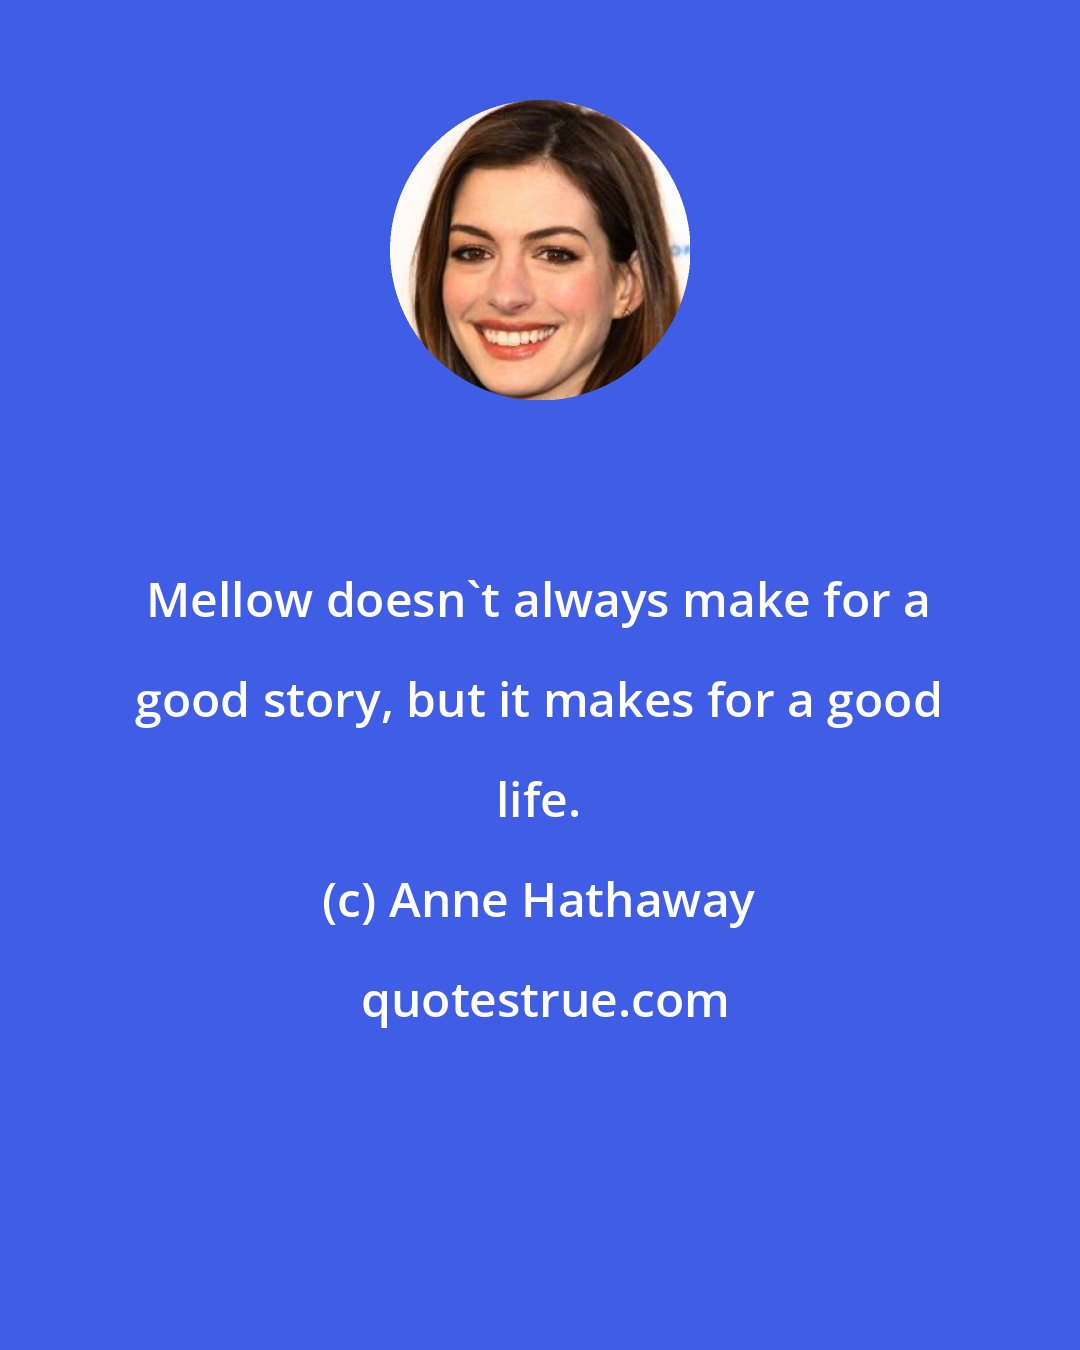 Anne Hathaway: Mellow doesn't always make for a good story, but it makes for a good life.